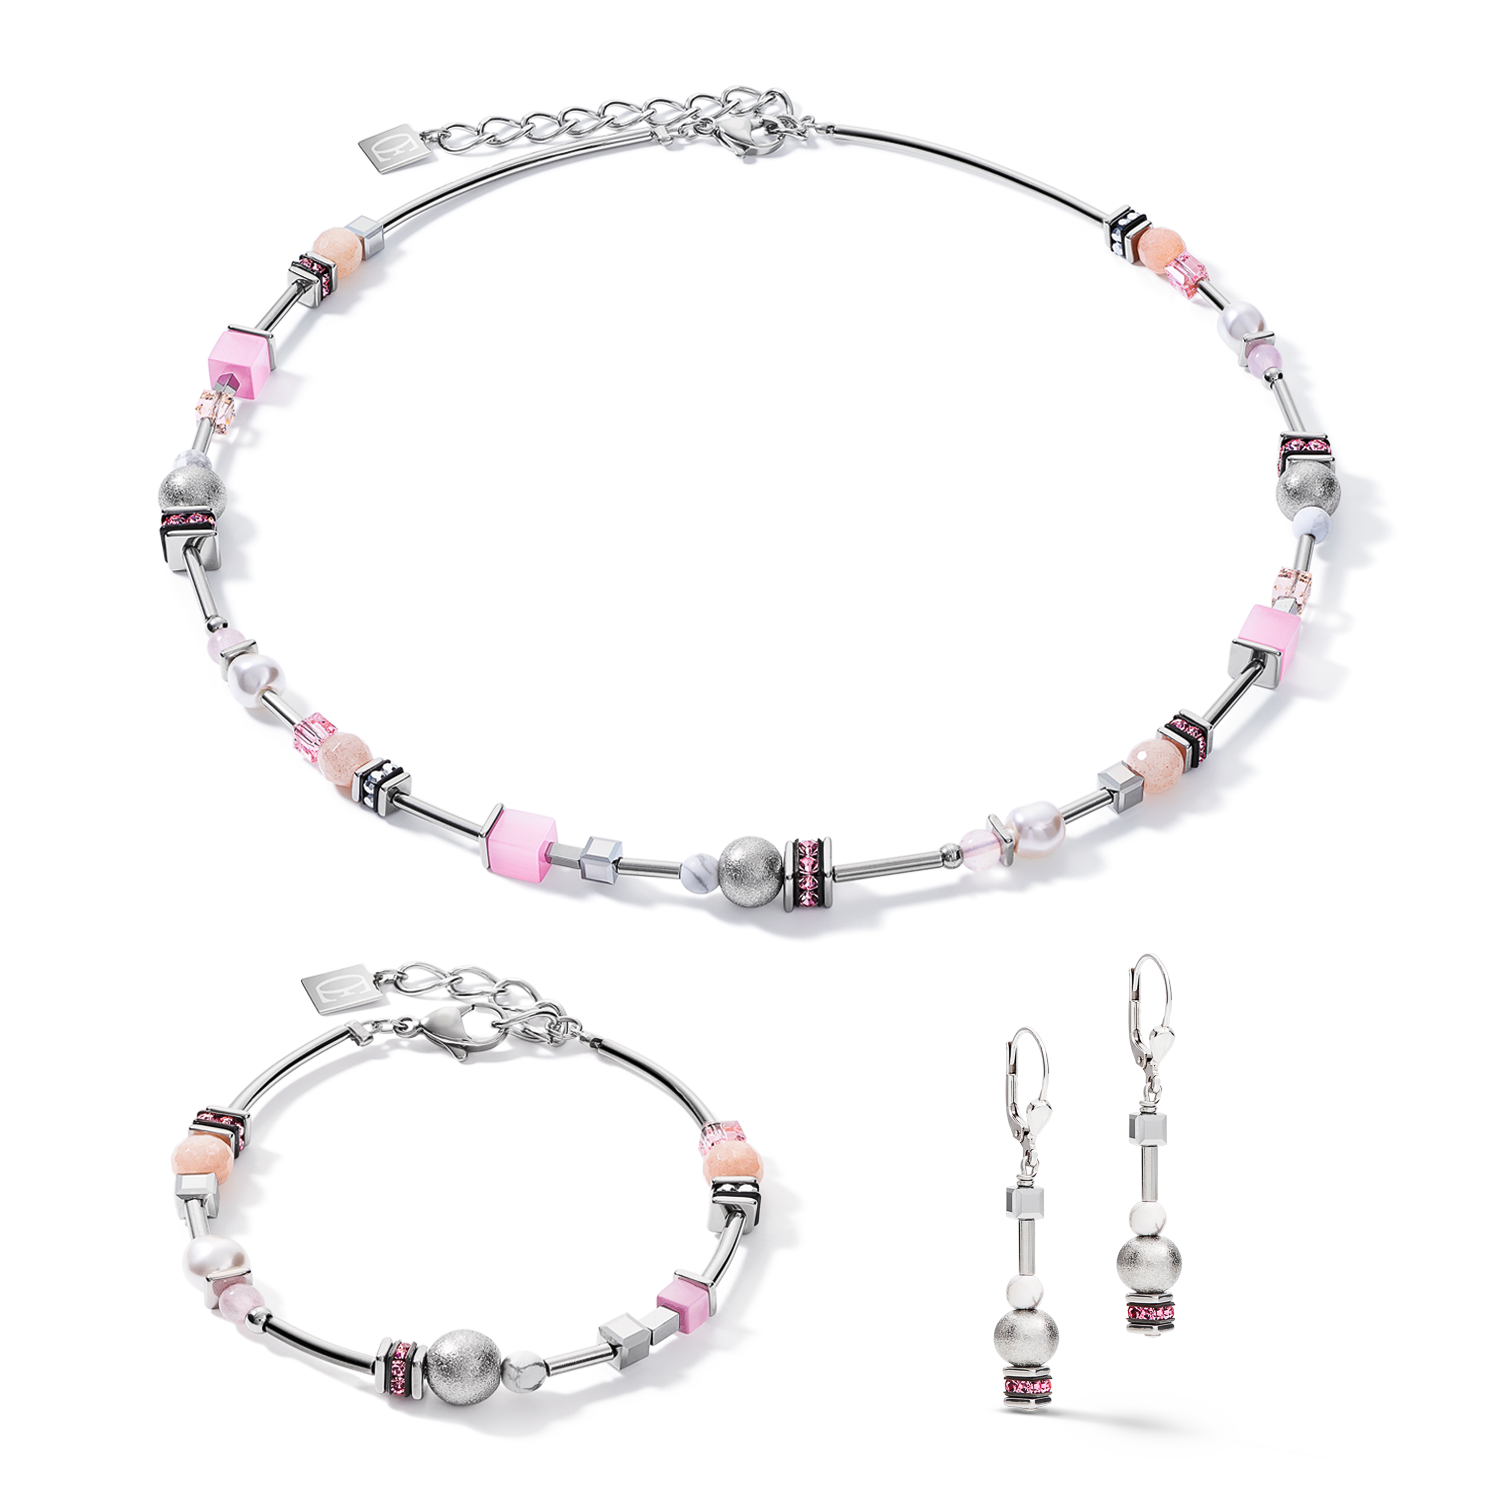 Armband Pearls & Cubes Edelsteine silber-rosa